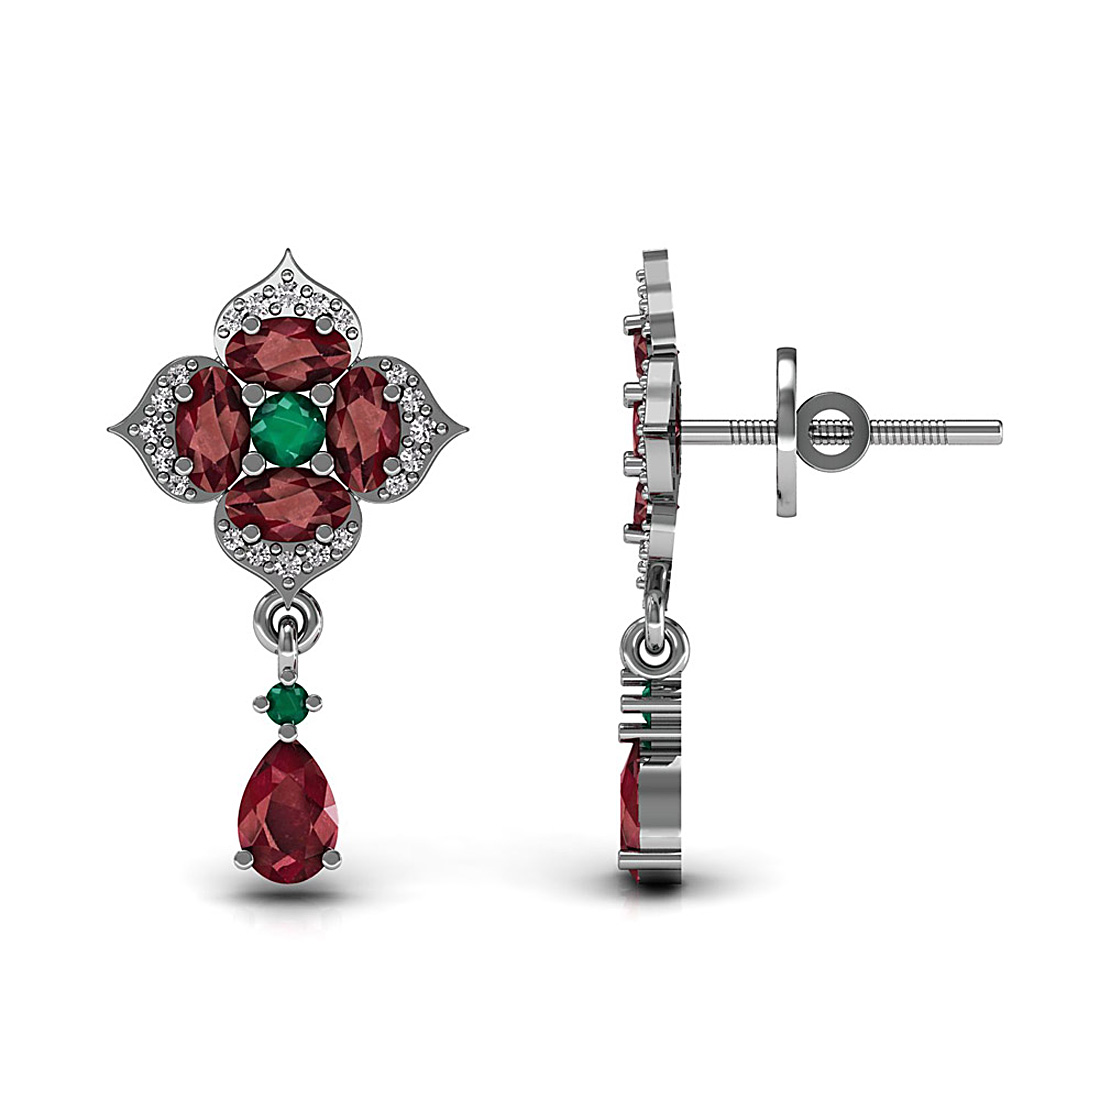 Diamond dangle drop earrings adorned with natural emerald and ruby gemstone made in 18k solid white gold.